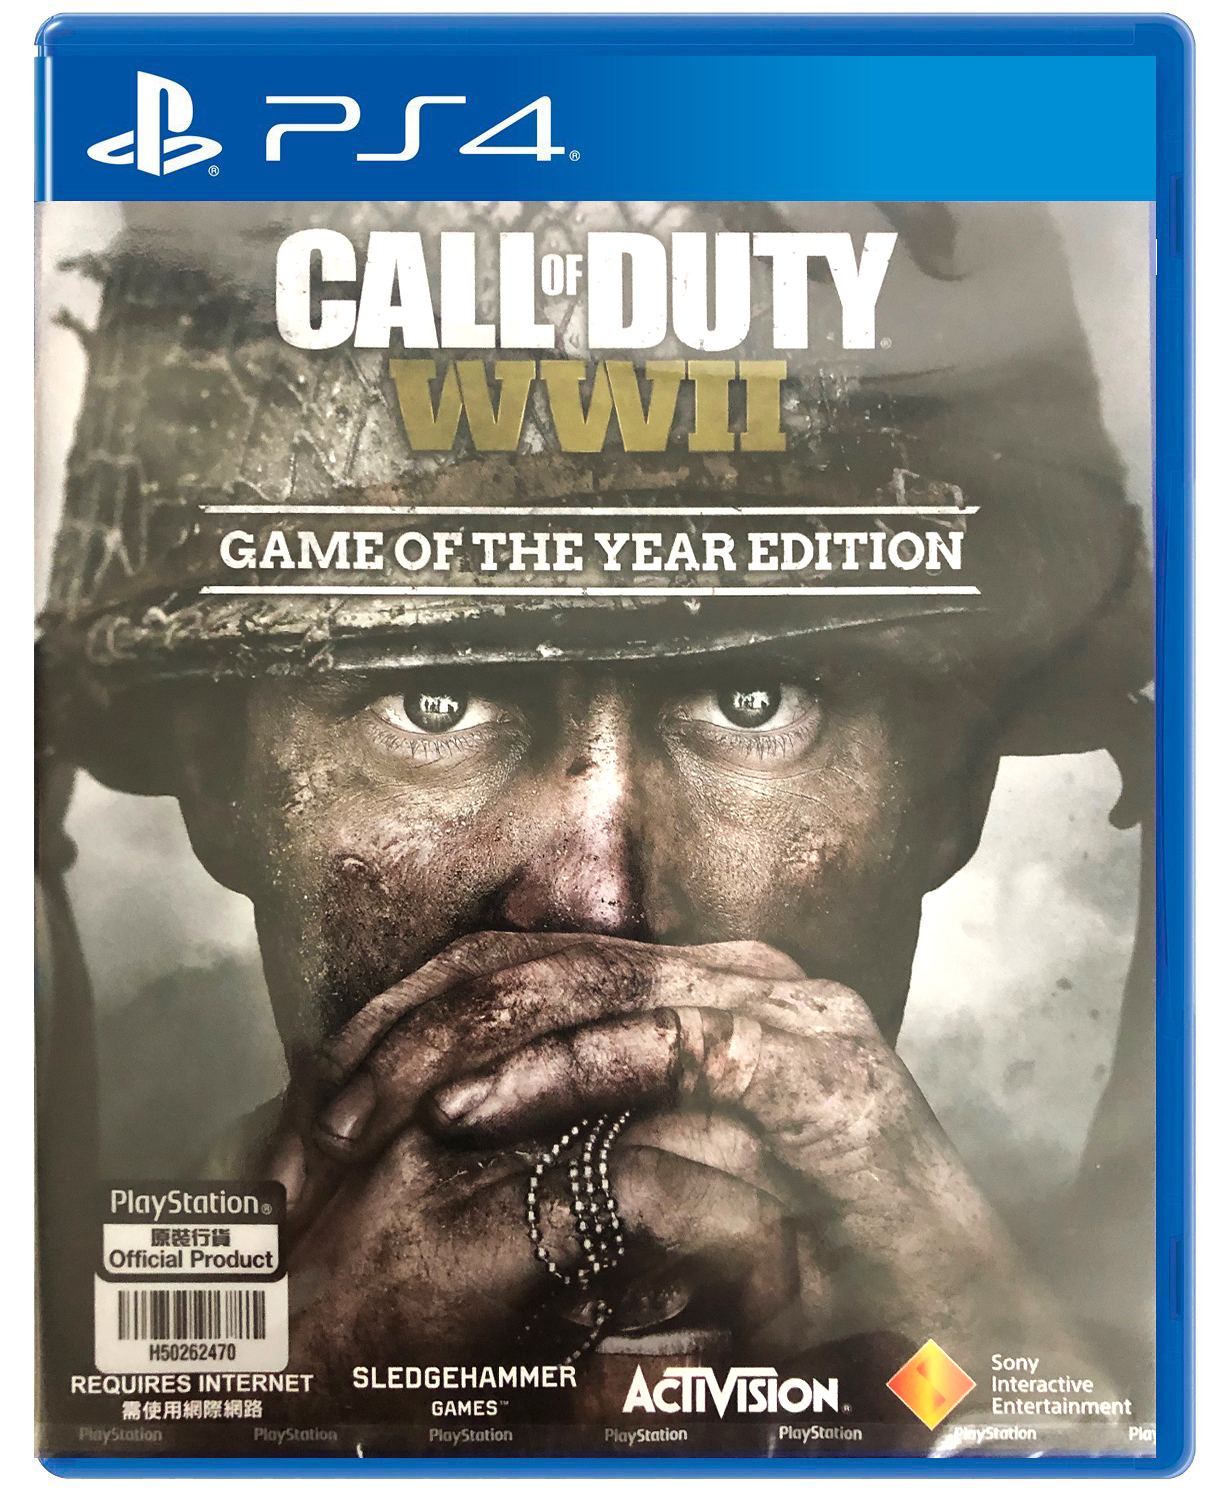 Call of Duty®: WWII